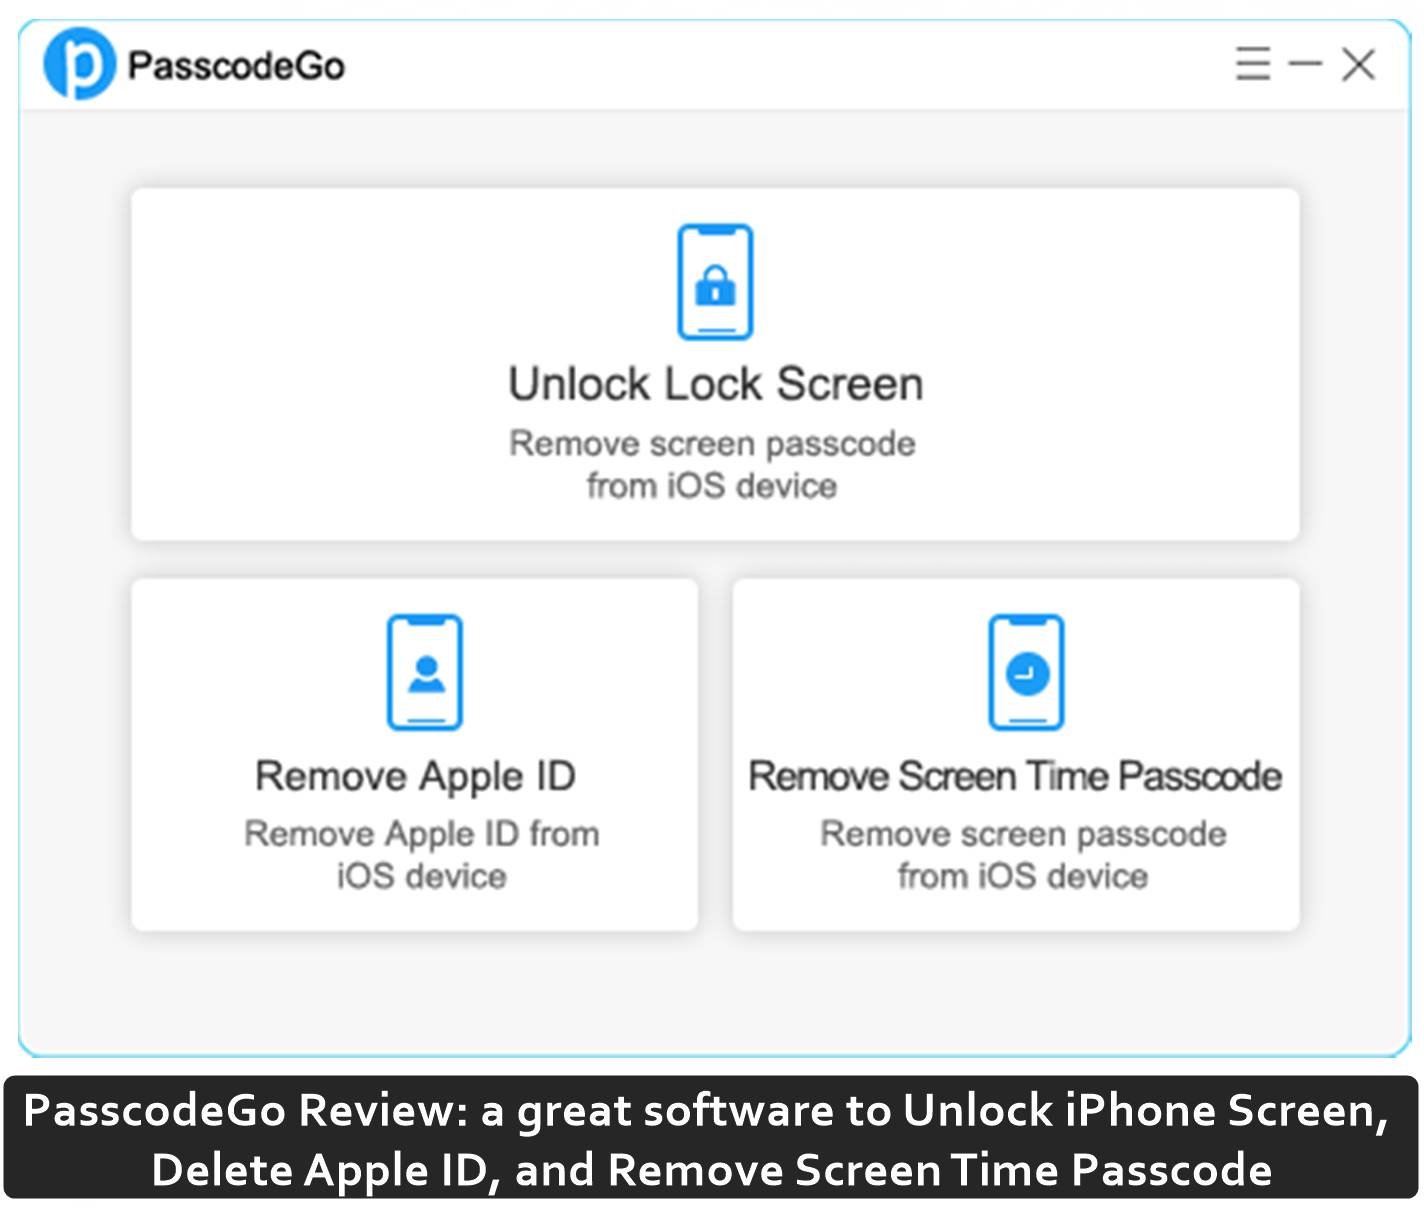 PasscodeGo Review: a great software to Unlock iPhone Screen, Delete Apple ID, and Remove Screen Time Passcode